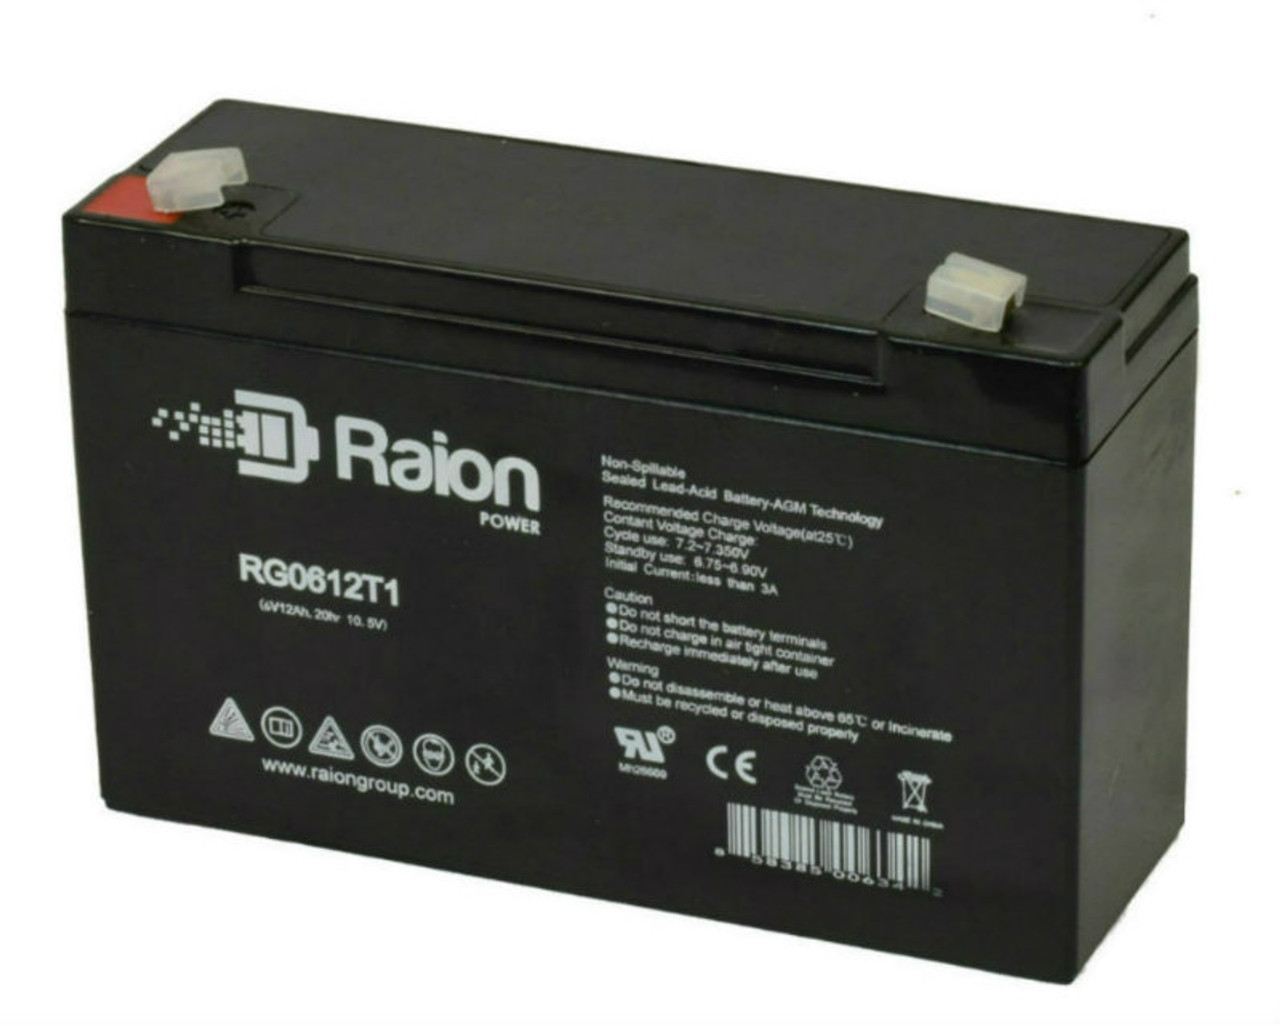 Raion Power RG06120T1 Replacement Battery for Jasco Battery RB6100-F1